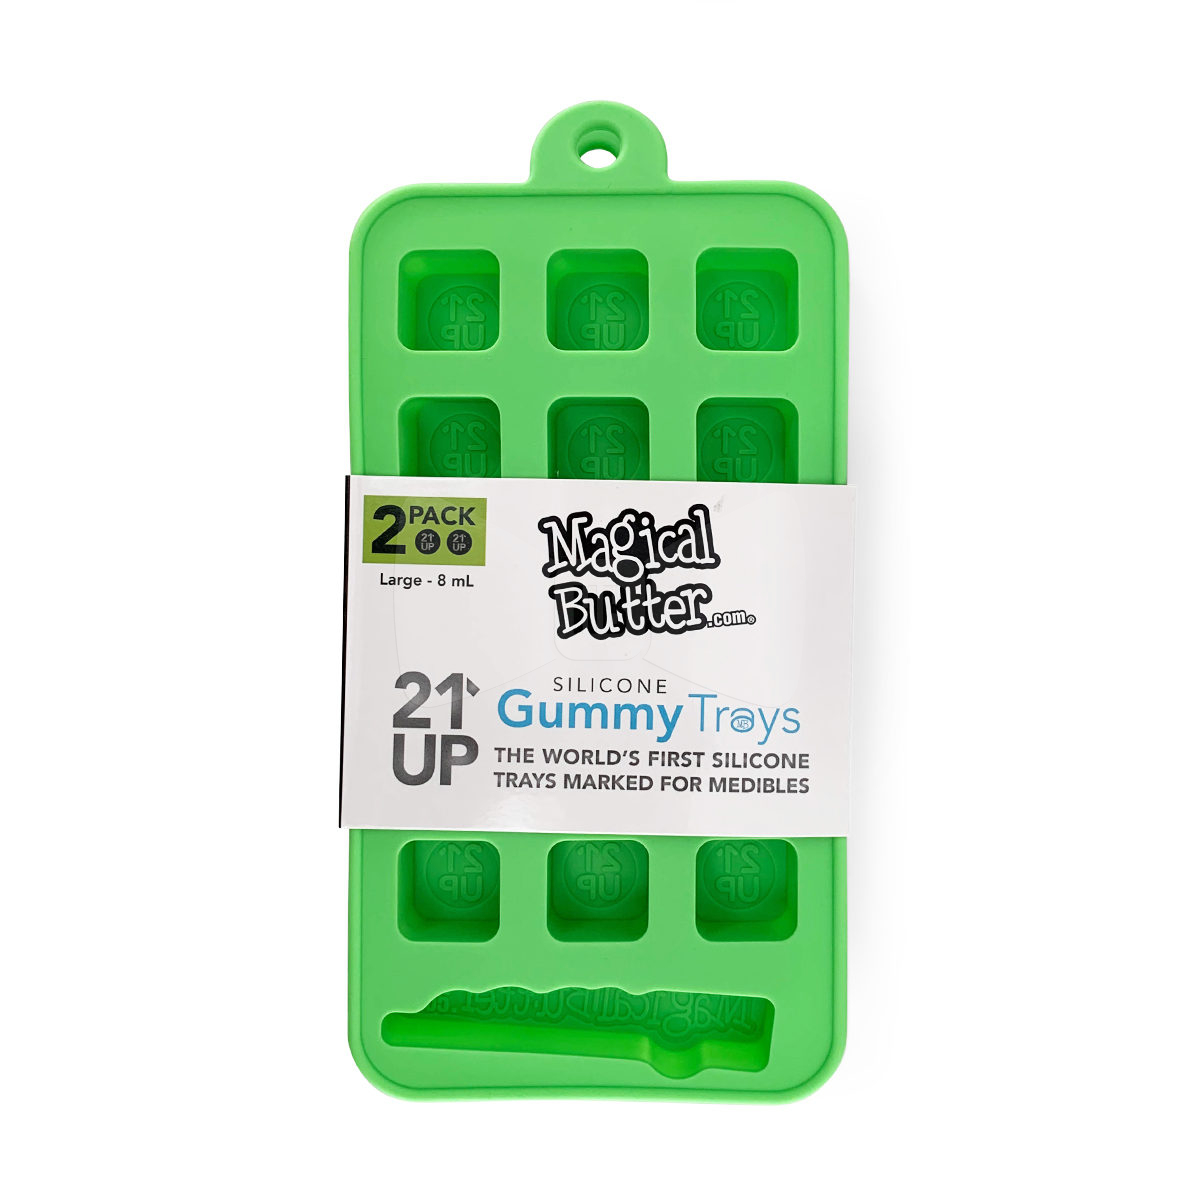 Magical Butter Gummy Trays 21UP - 2 pack 8ml Trays